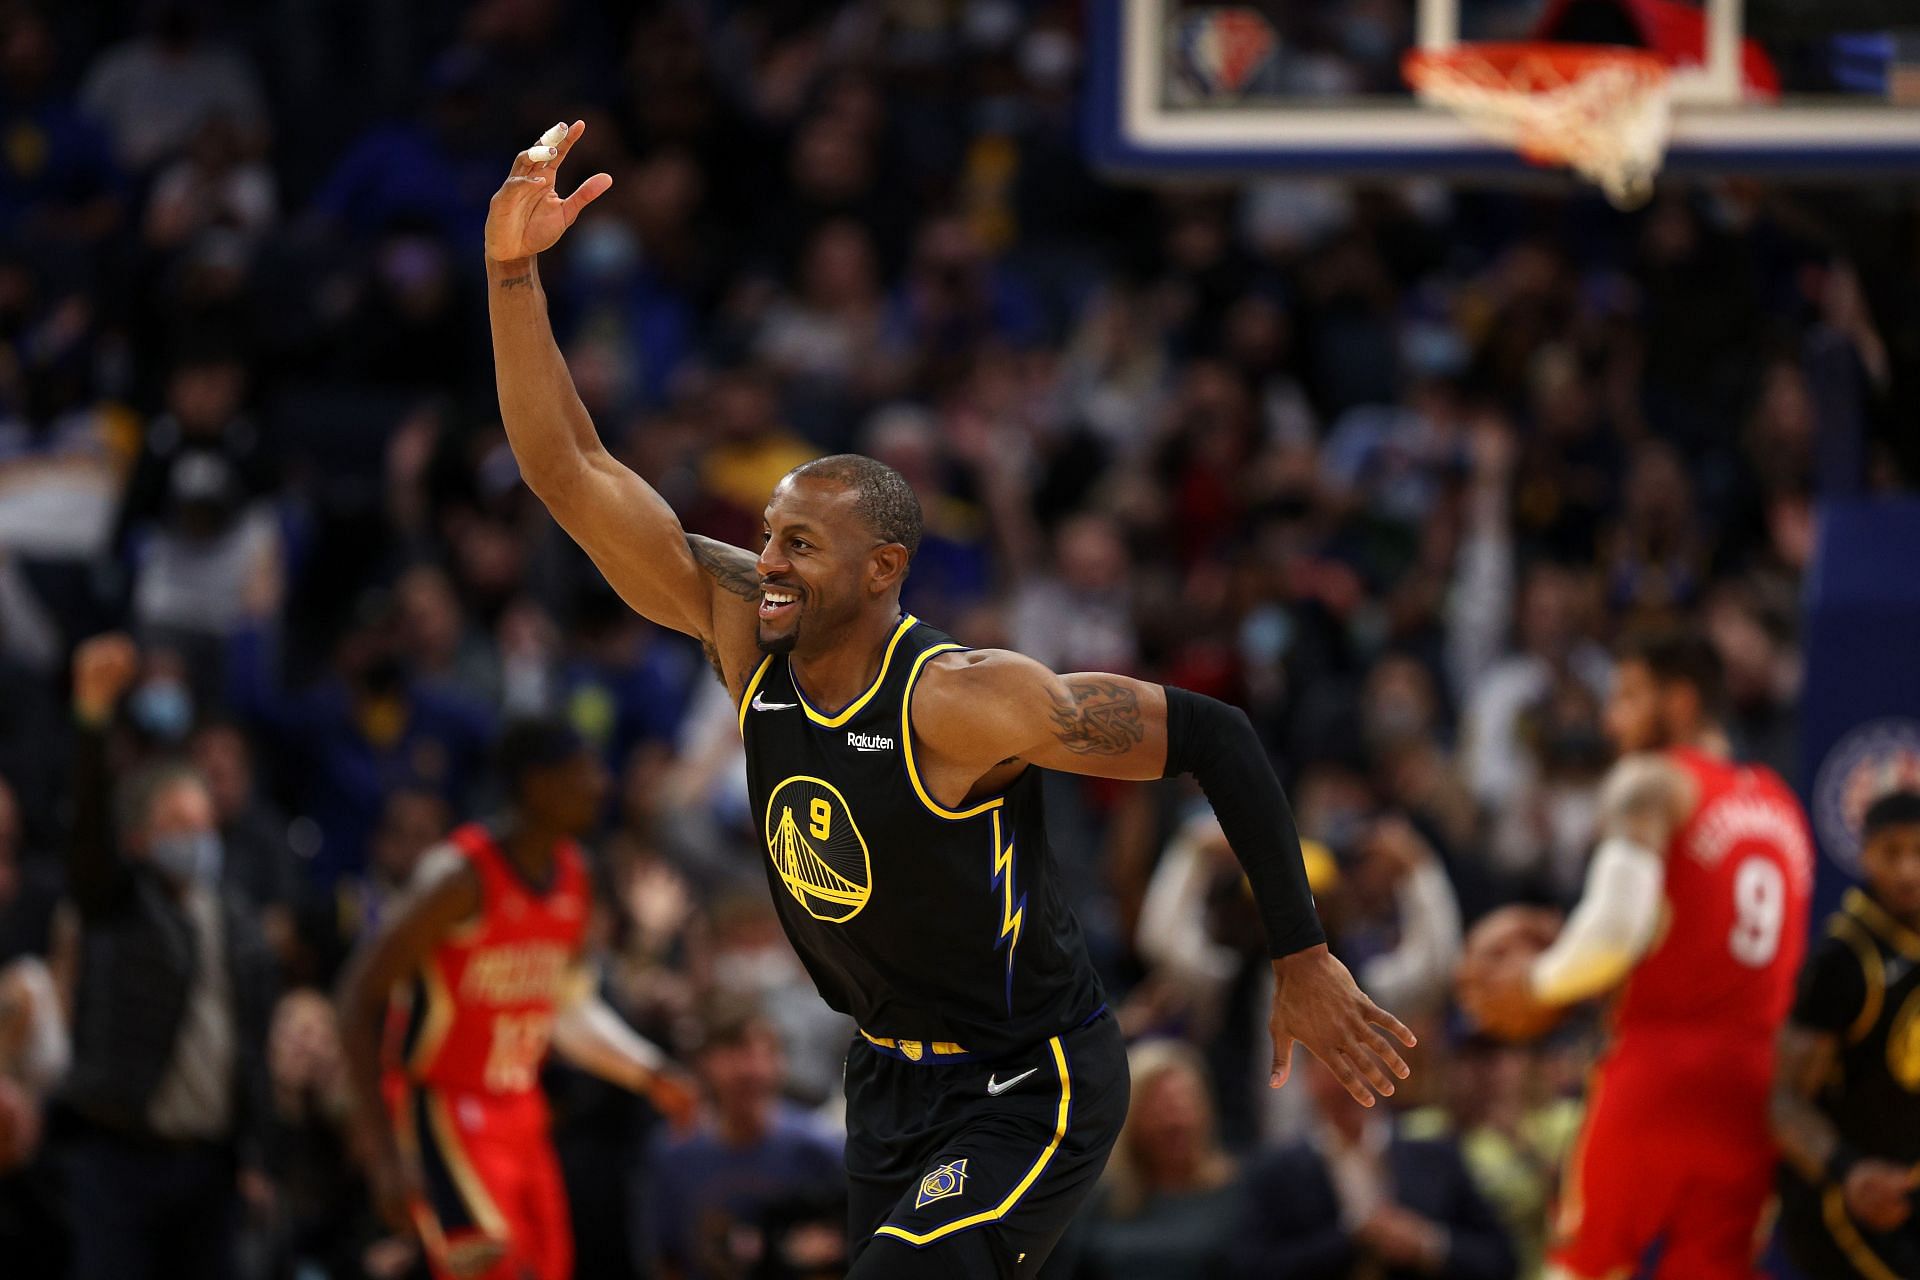 Andre Iguodala #9 of the Golden State Warriors reacts after Gary Payton II #0 of the Golden State Warriors made a basket against the New Orleans Pelicans at Chase Center on November 05, 2021 in San Francisco, California.